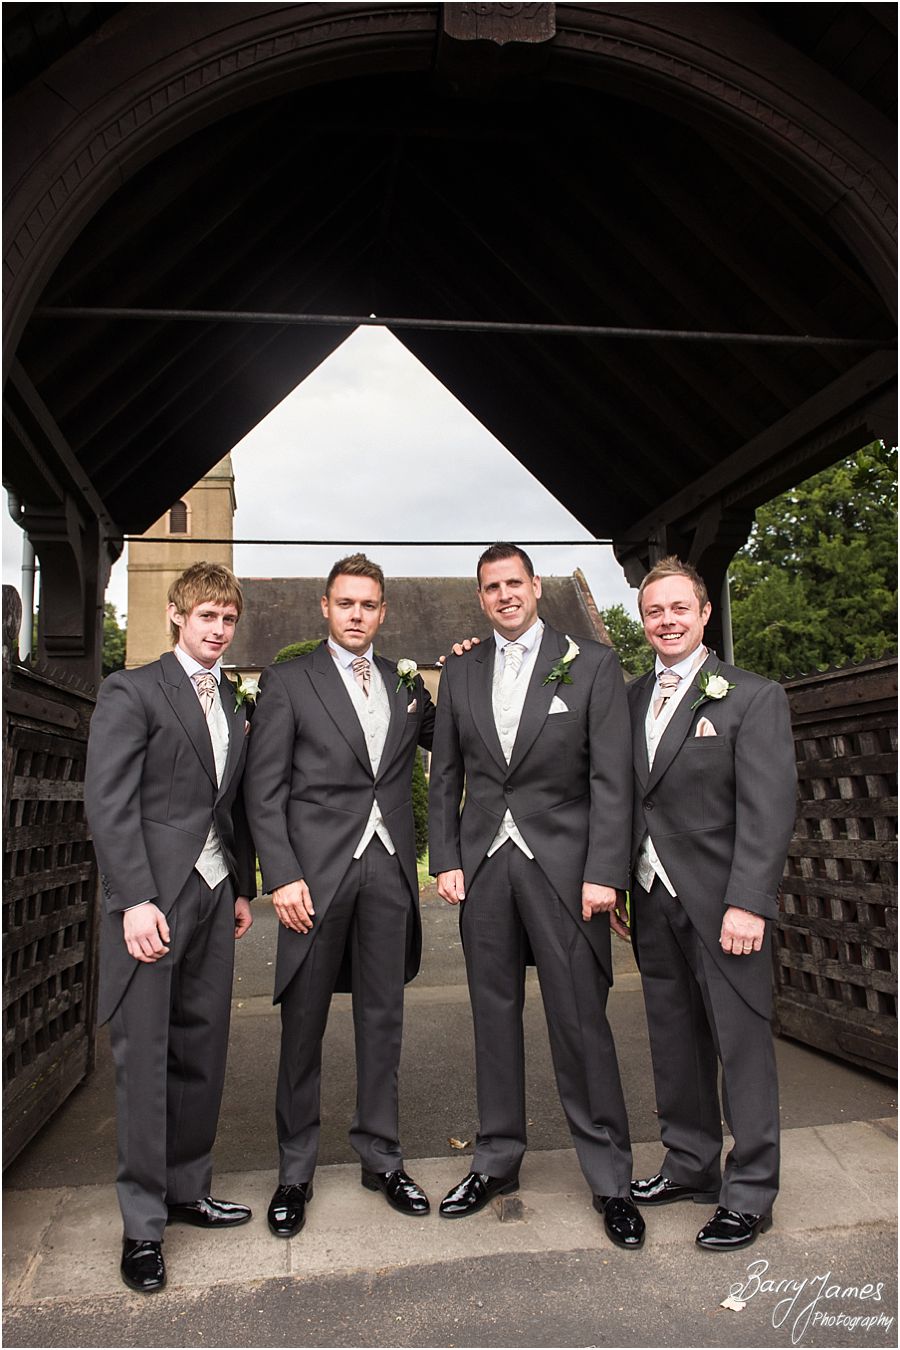 Relaxed contemporary wedding photography at Himley Church in Dudley by Staffordshire Wedding Photographer Barry James